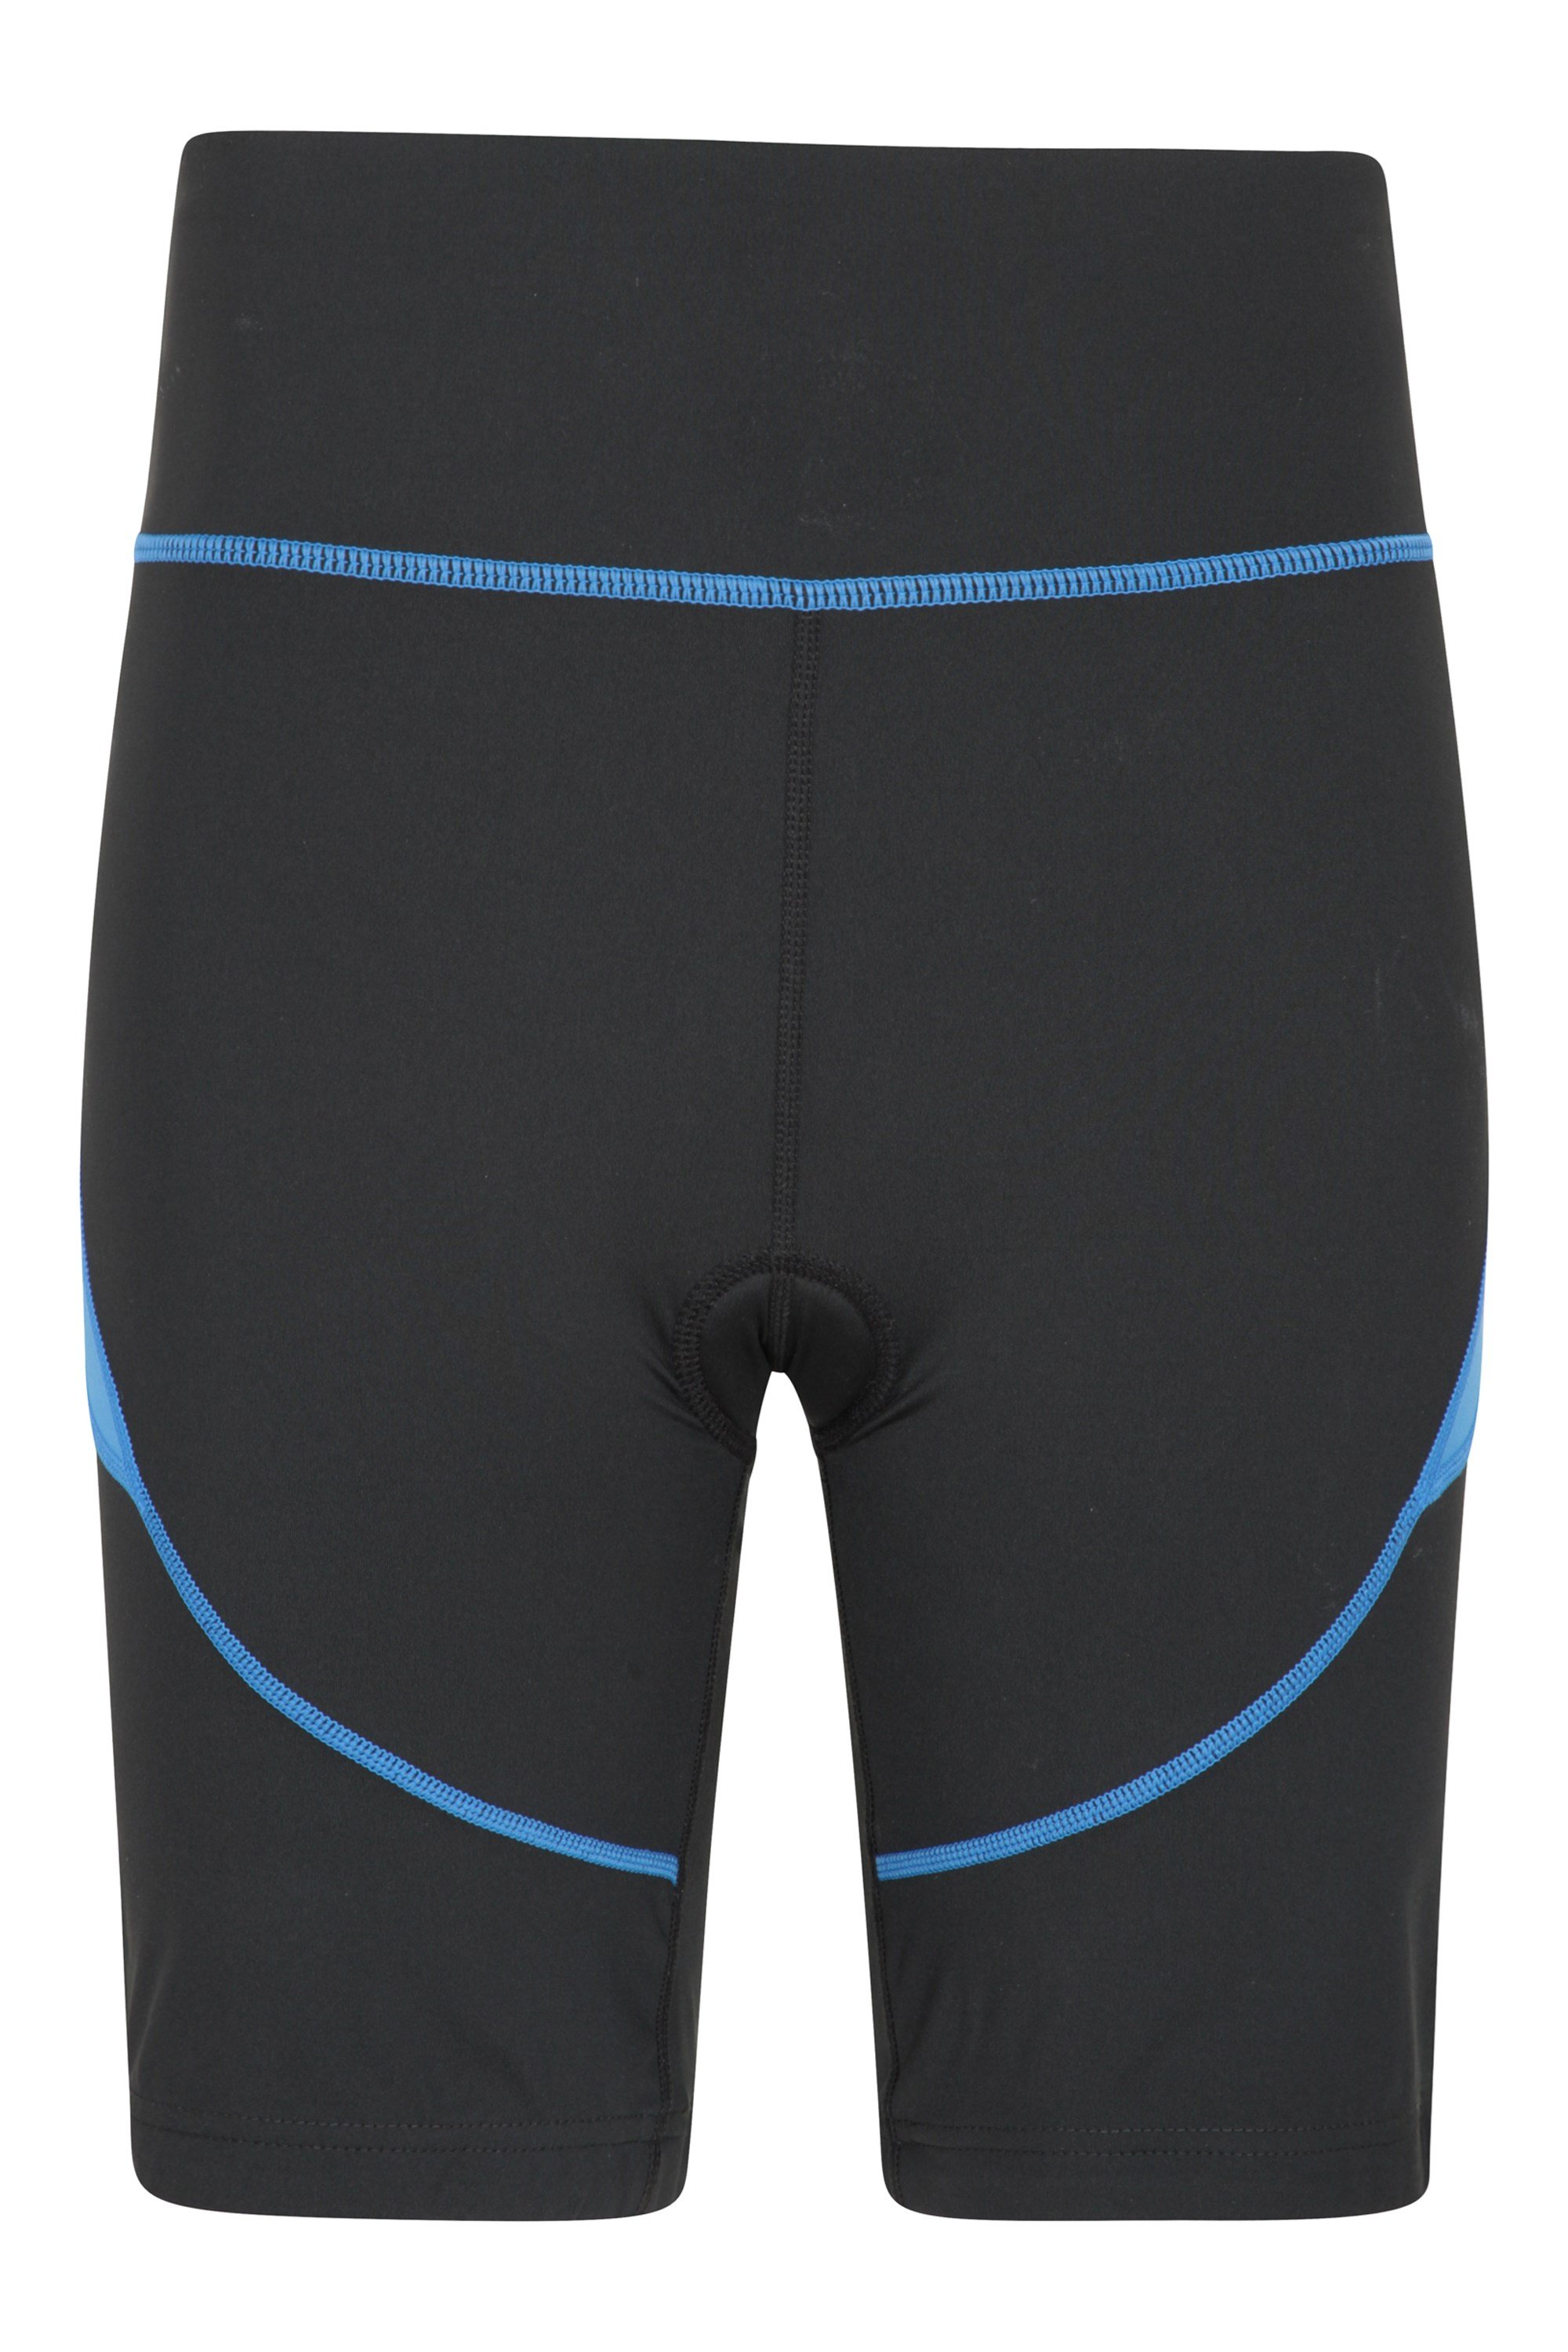 Speed Up Womens Cycle Shorts | Mountain Warehouse GB